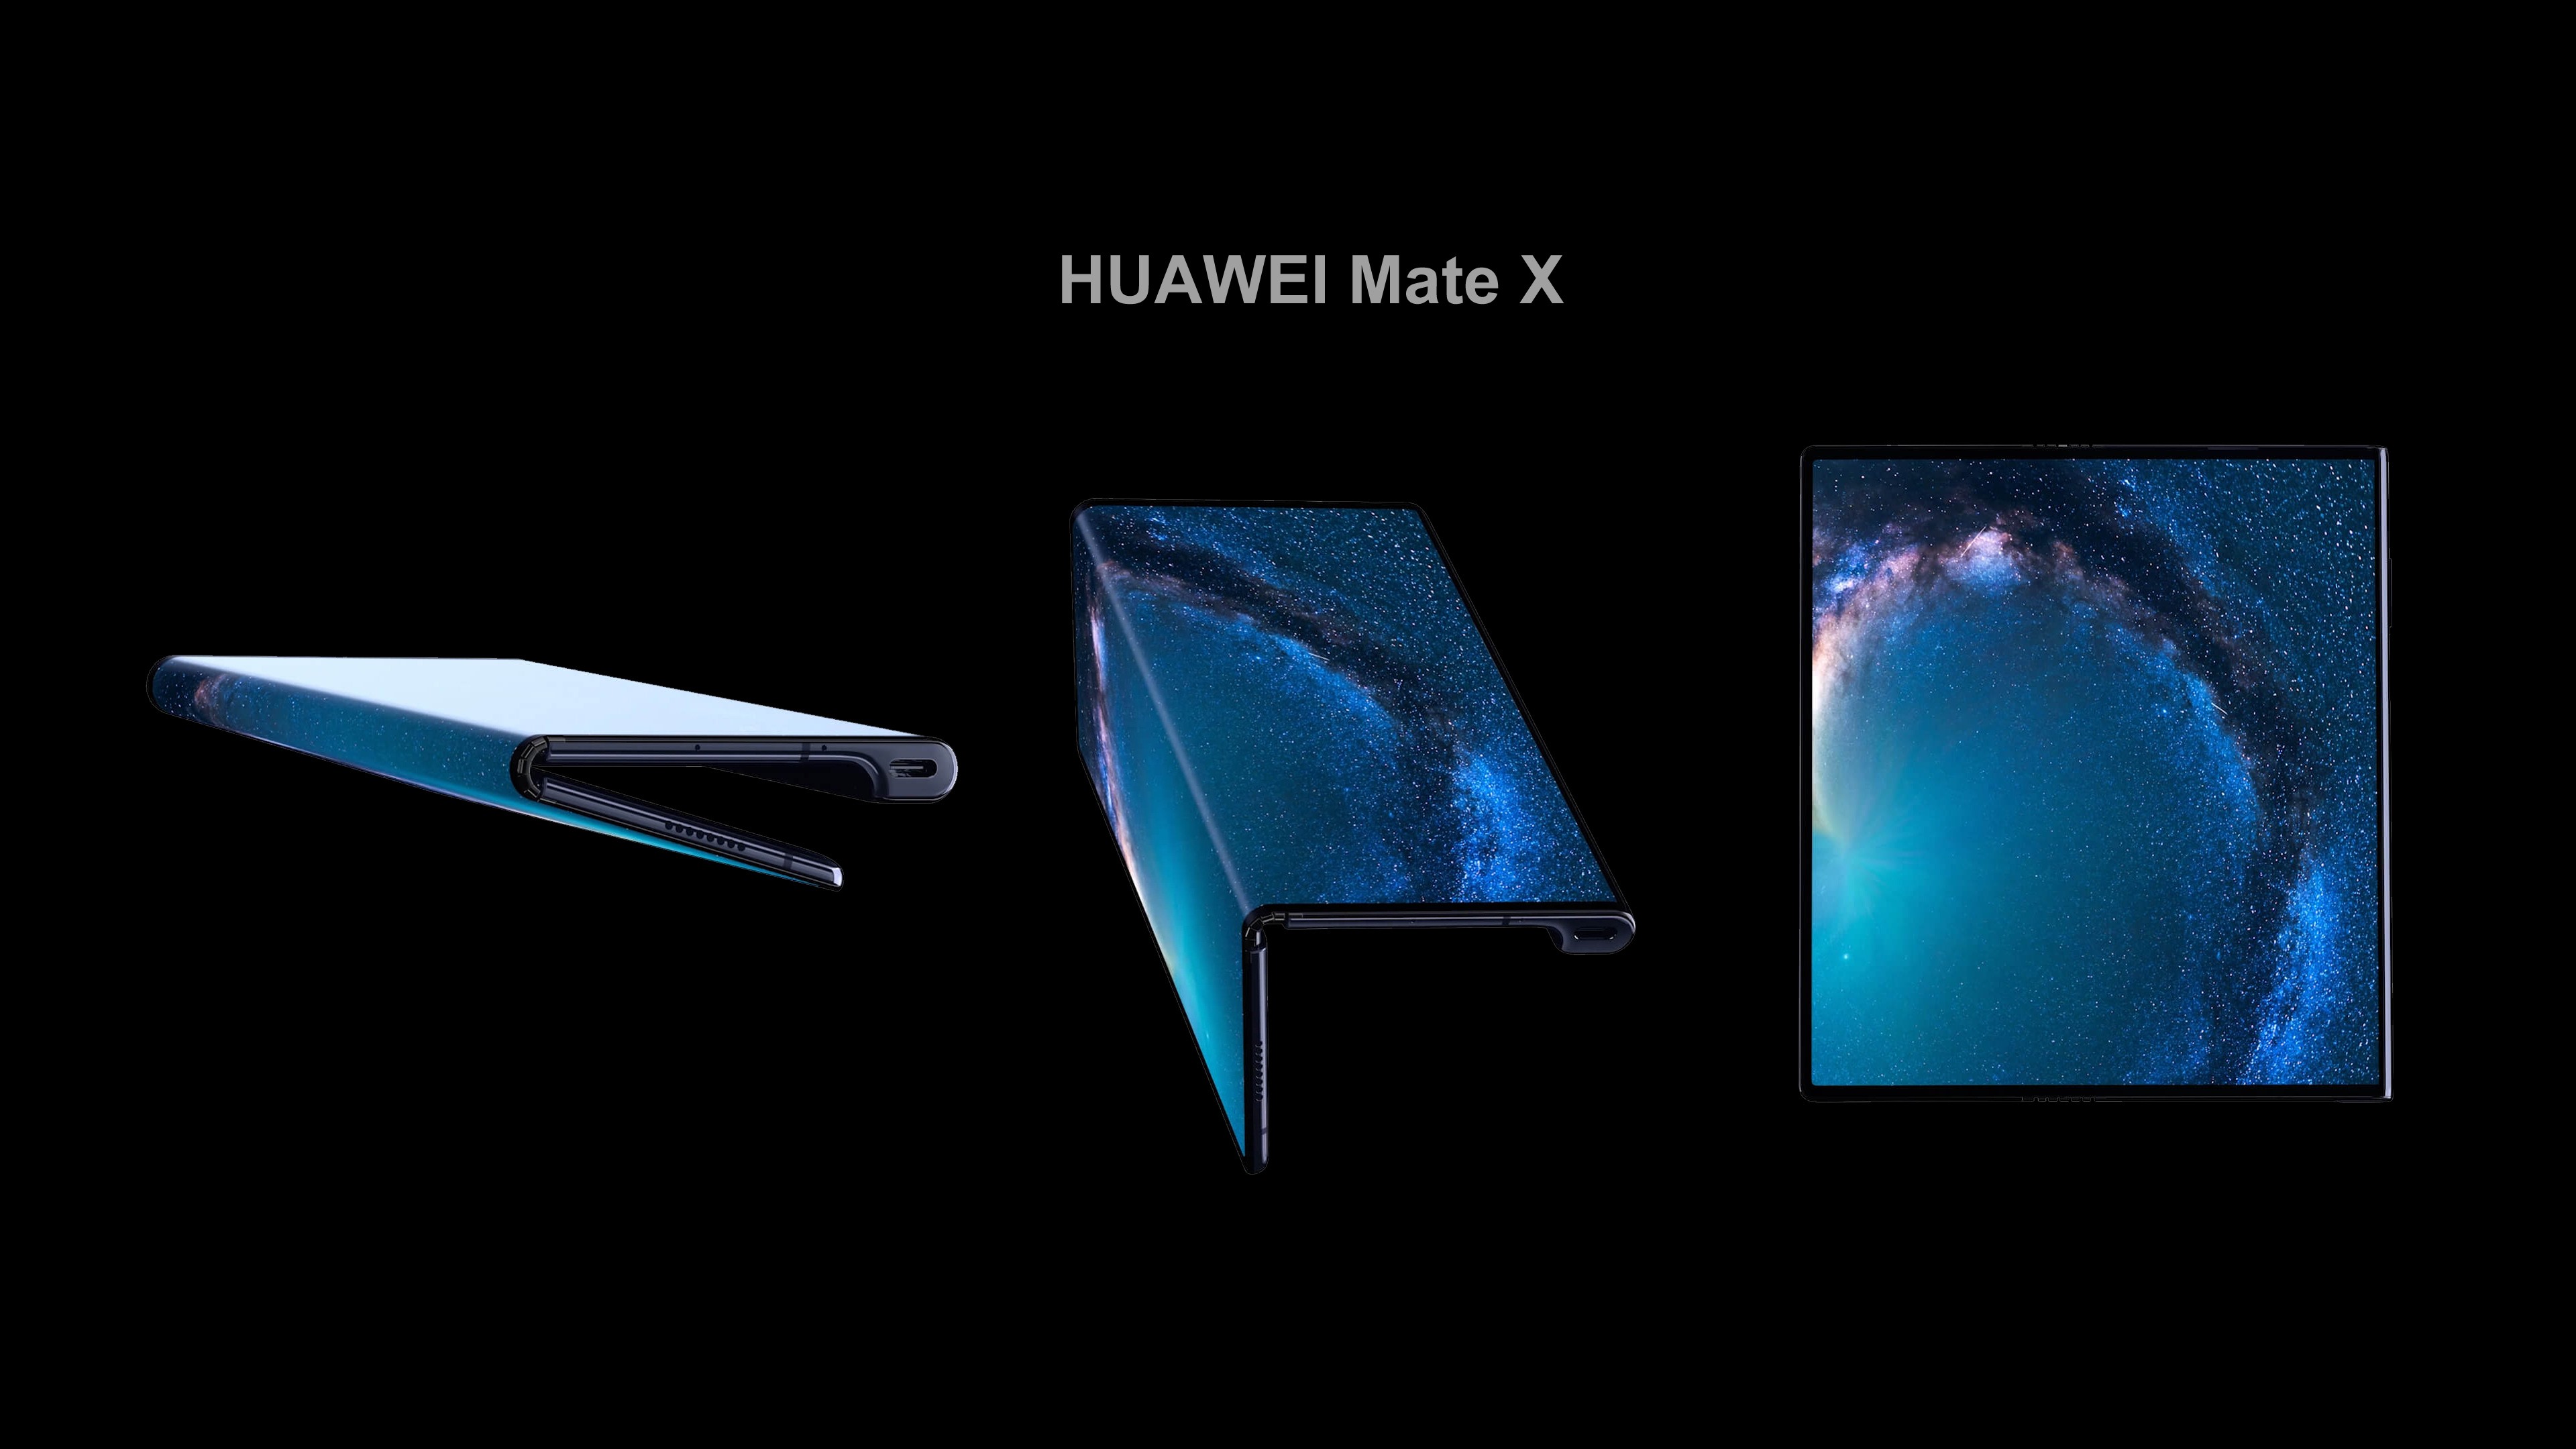 Wallpaper Huawei Mate X 5g Smartphone, Can Bend And - Display Device - HD Wallpaper 